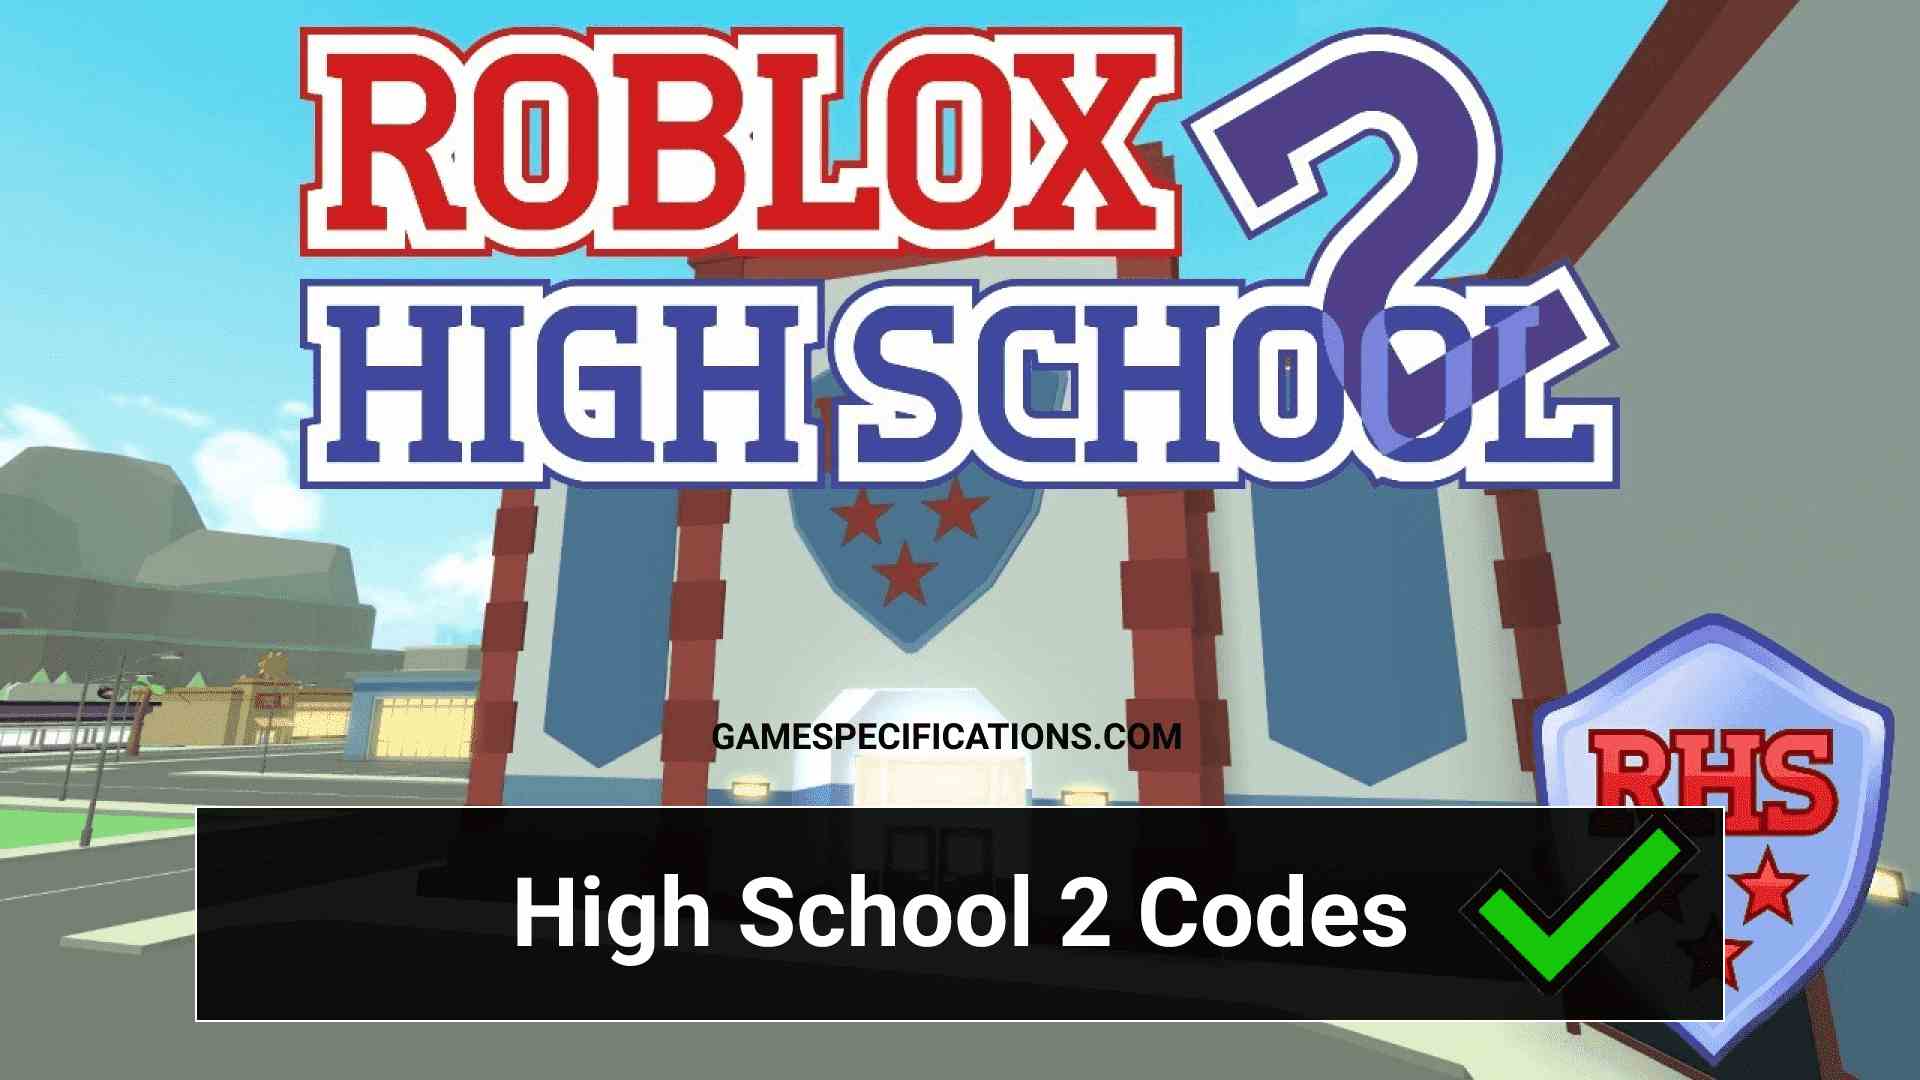 17 Working Roblox High School 2 Codes July 2021 Game Specifications - playing roblox high school